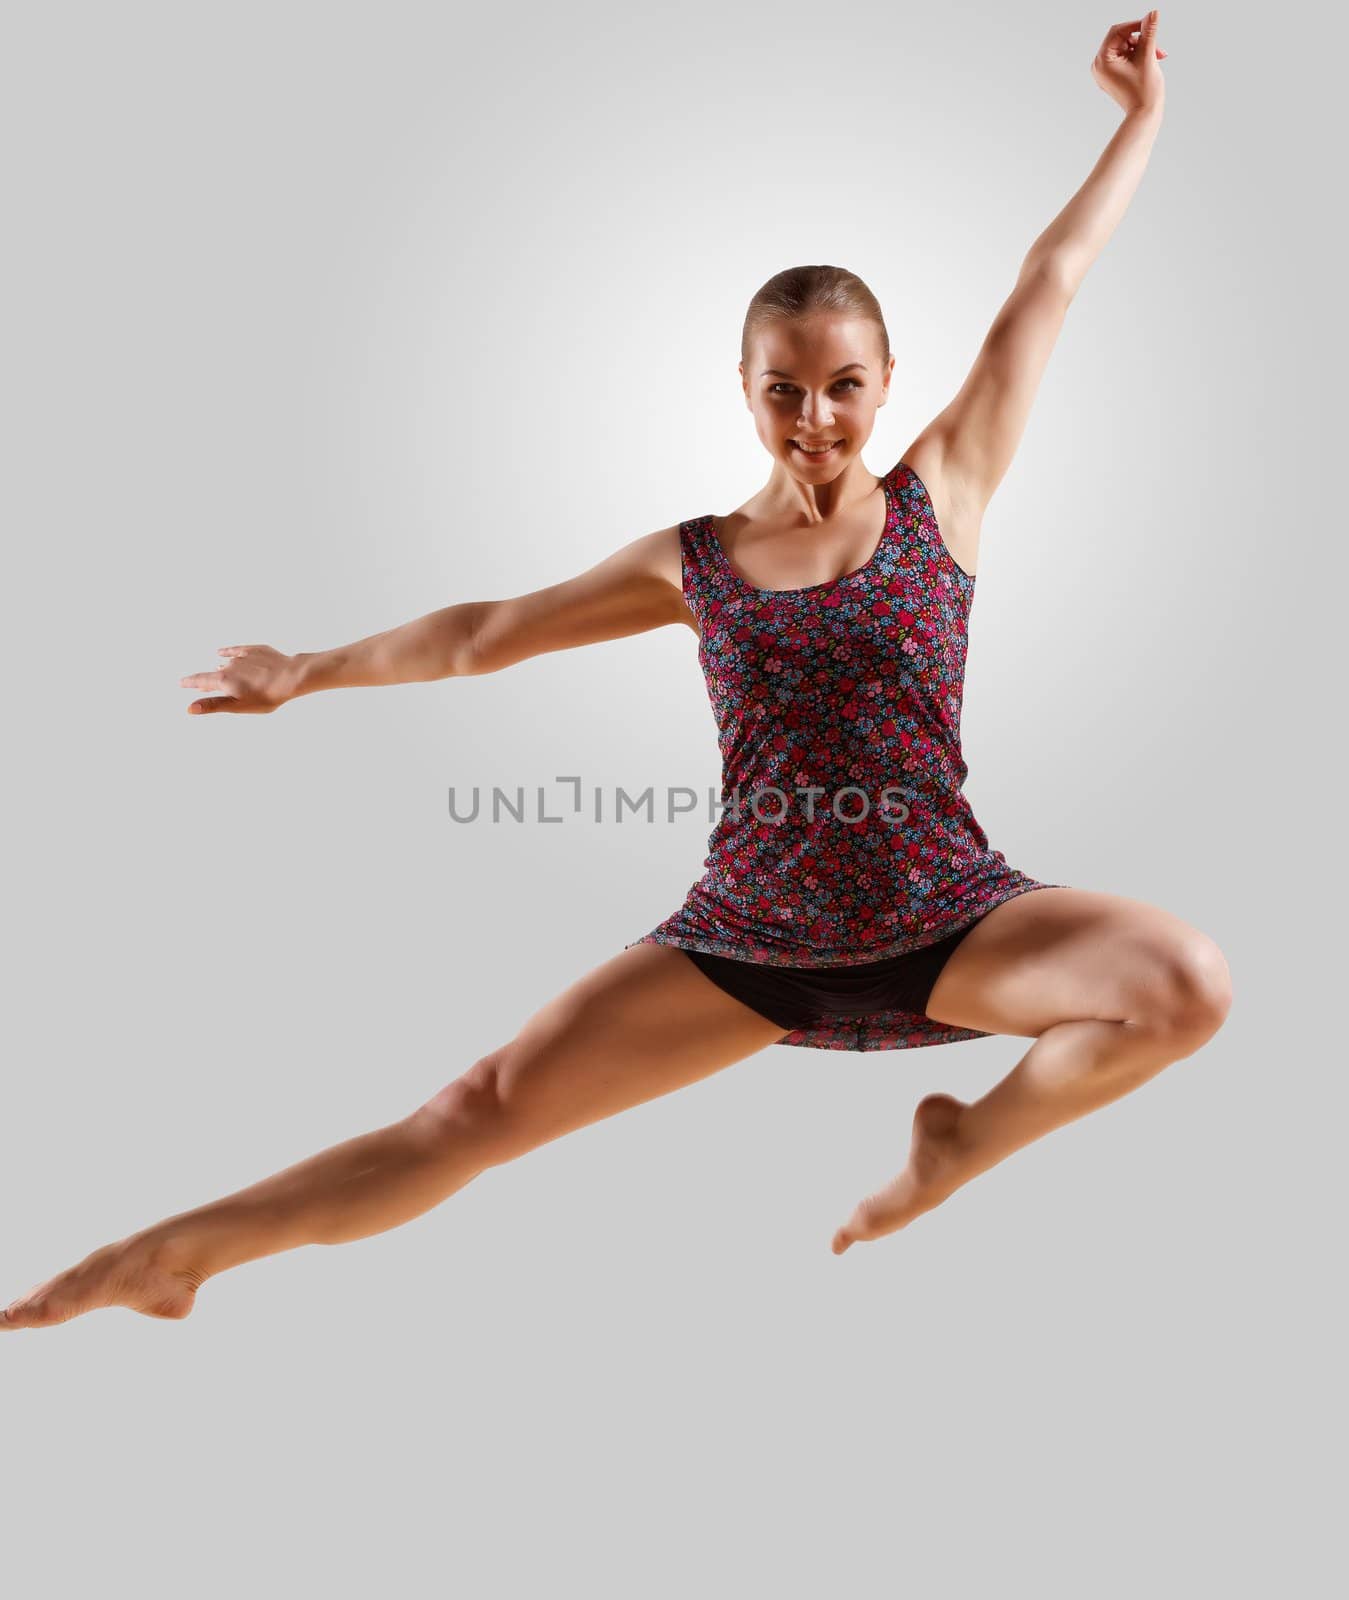 Girl dancing in a color dress with a gray background. isolate